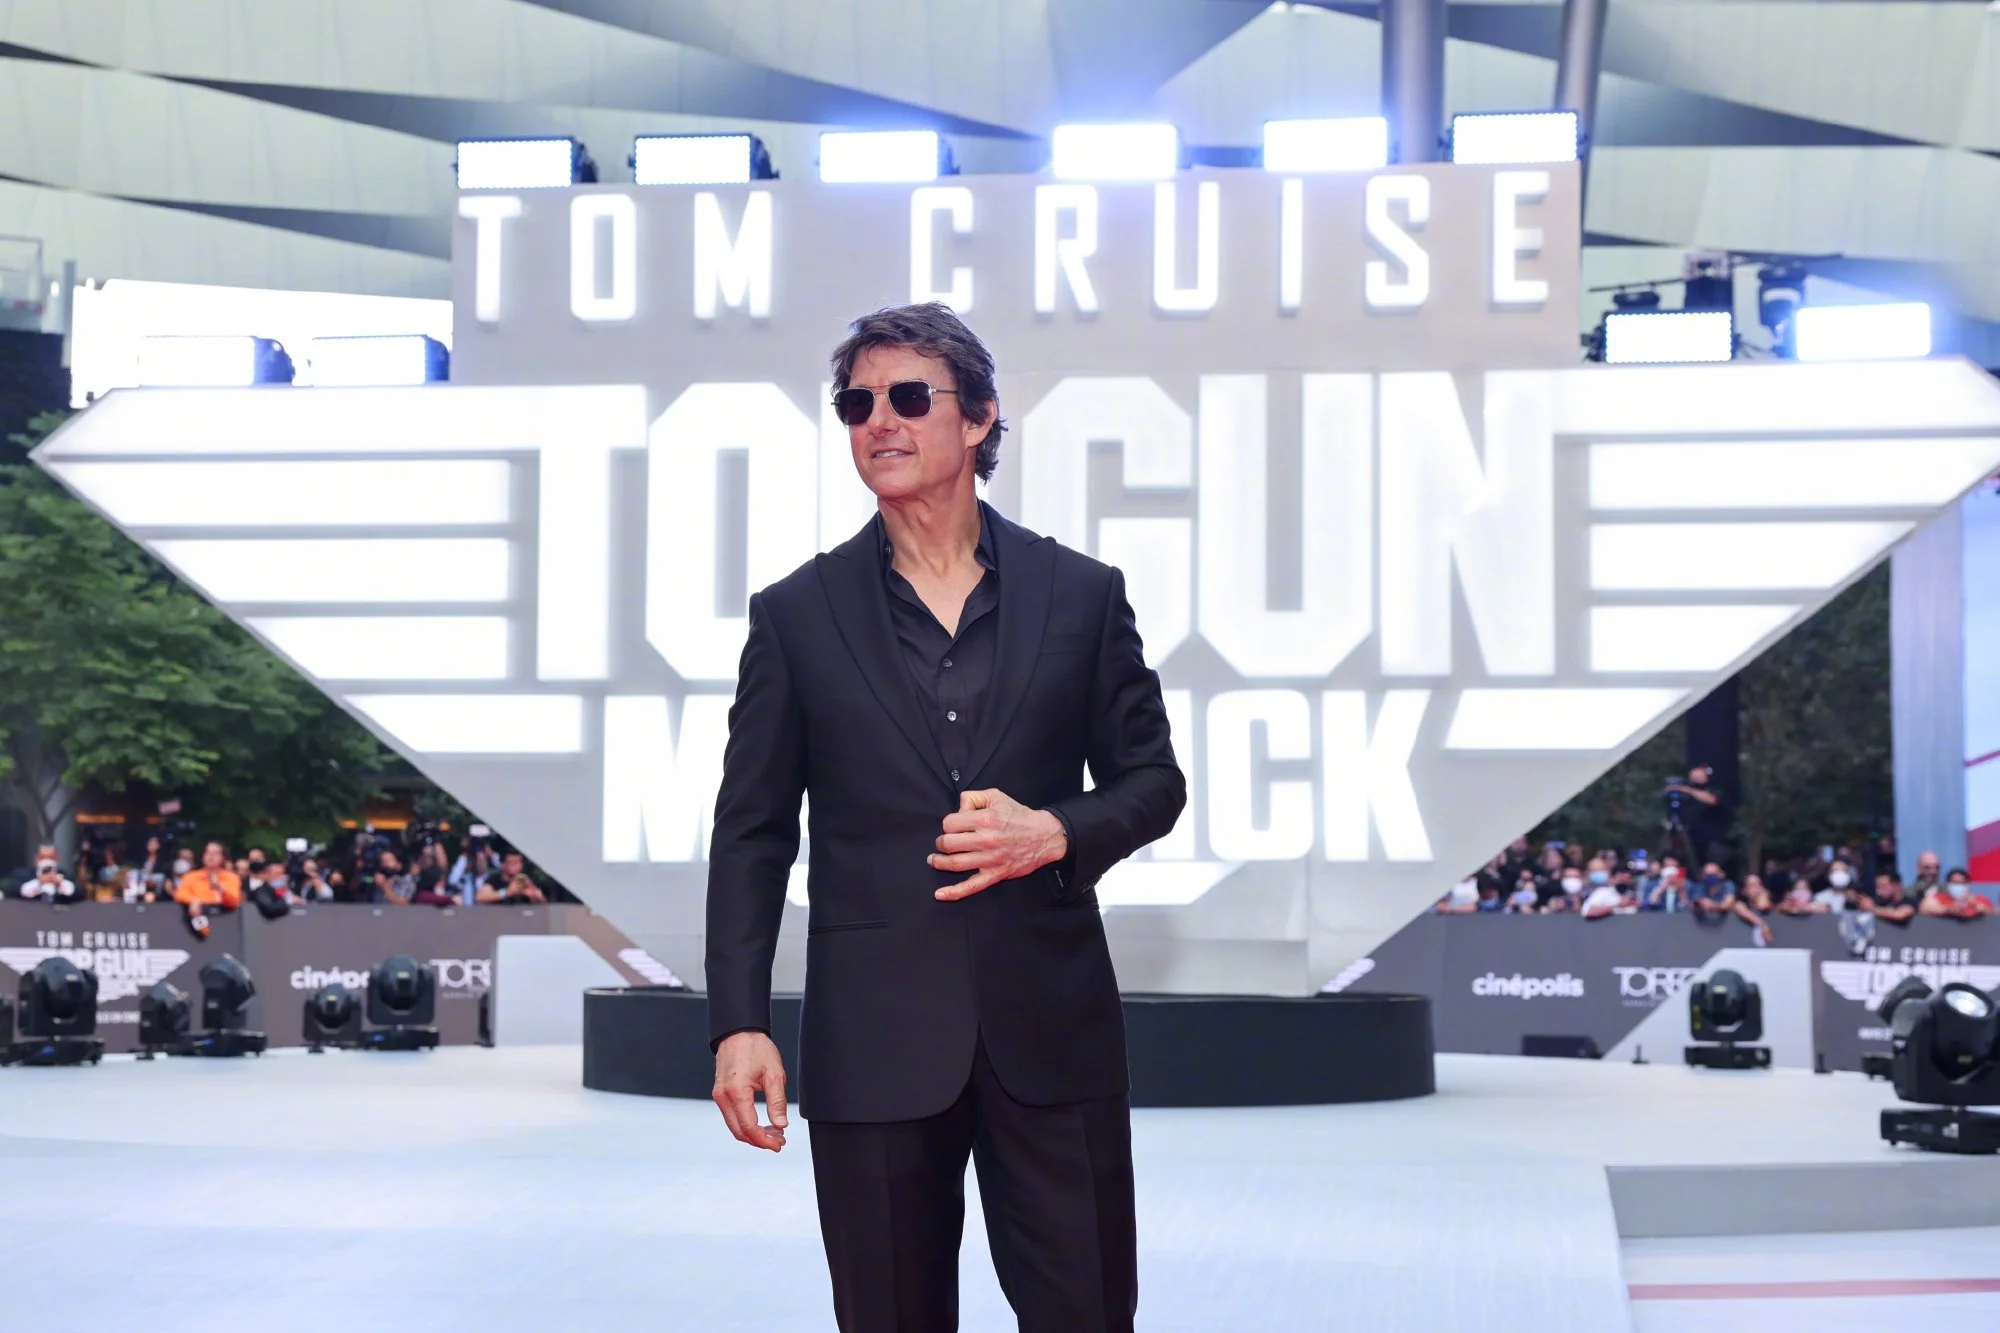 "Top Gun: Maverick" premieres in Mexico City, Tom Cruise and the cast appear ​​​